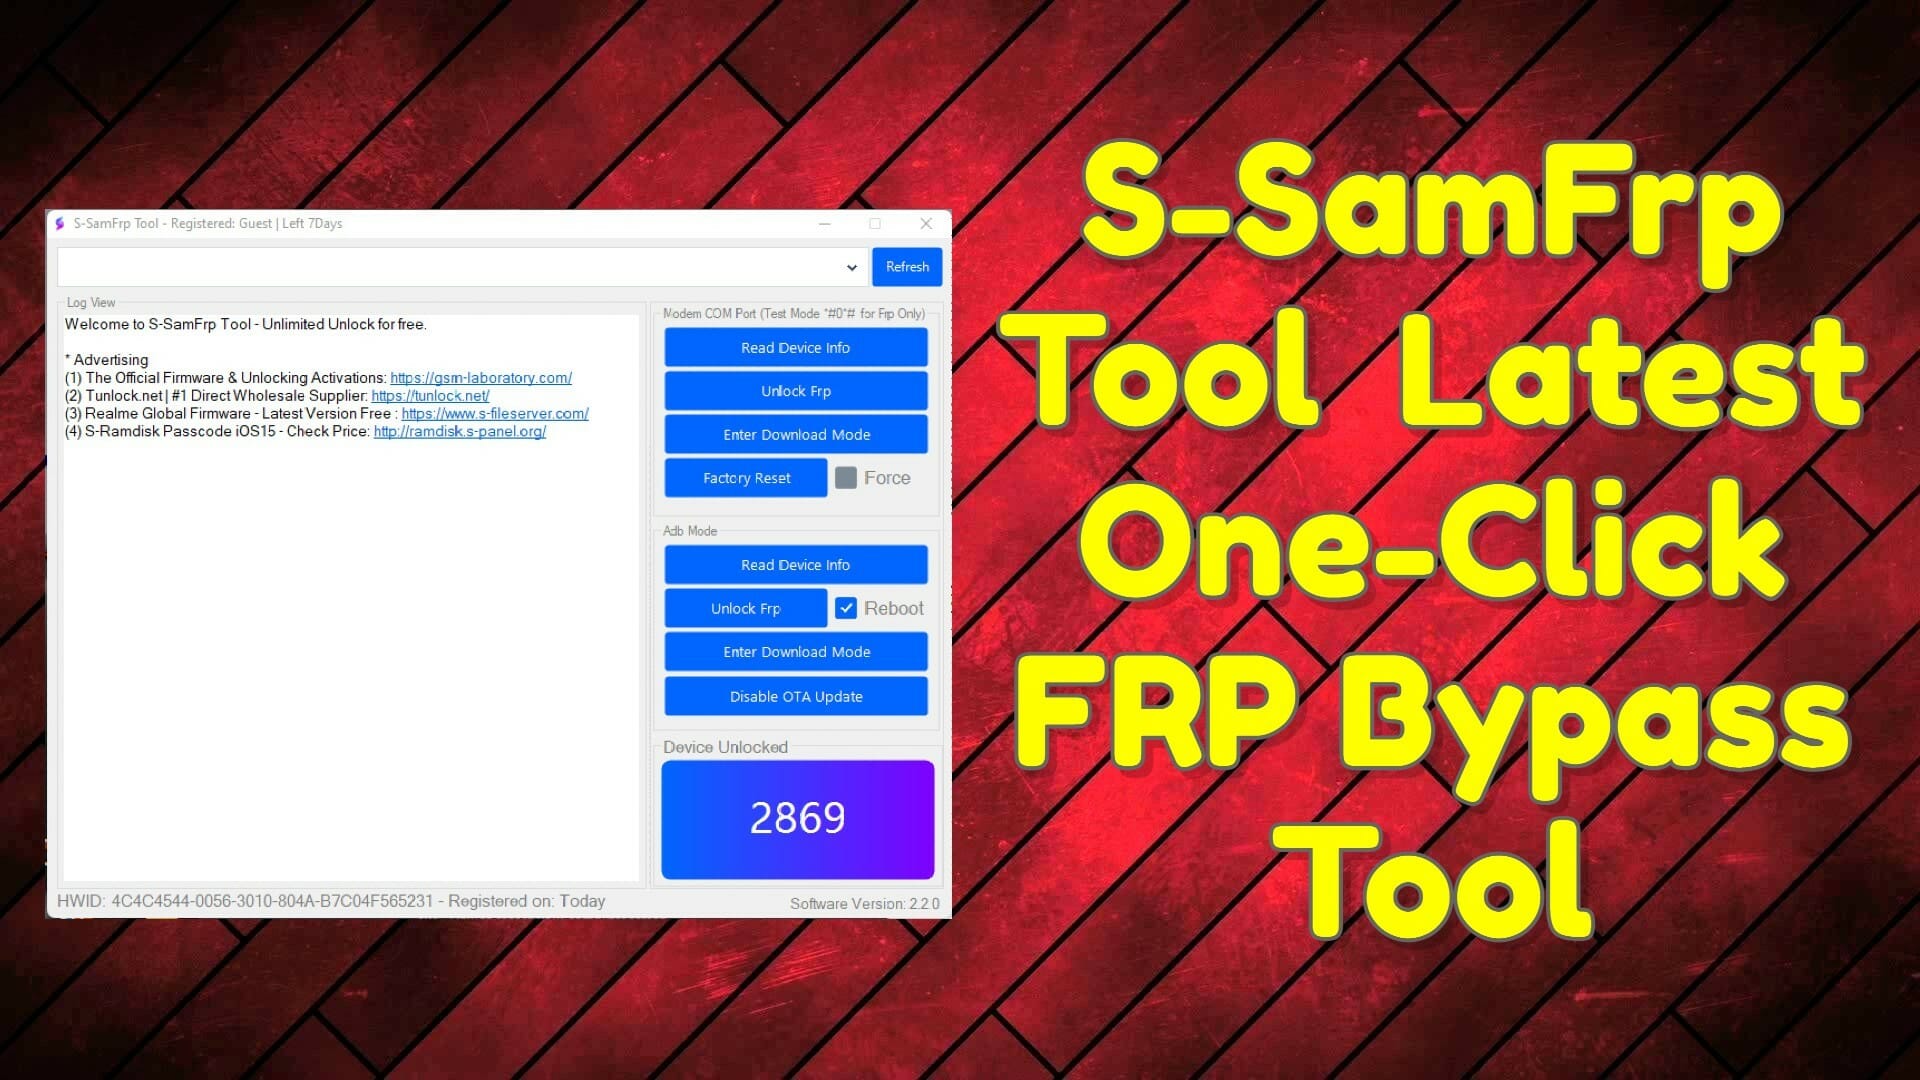 S-samfrp tool v2. 2. 0 latest one-click frp bypass tool